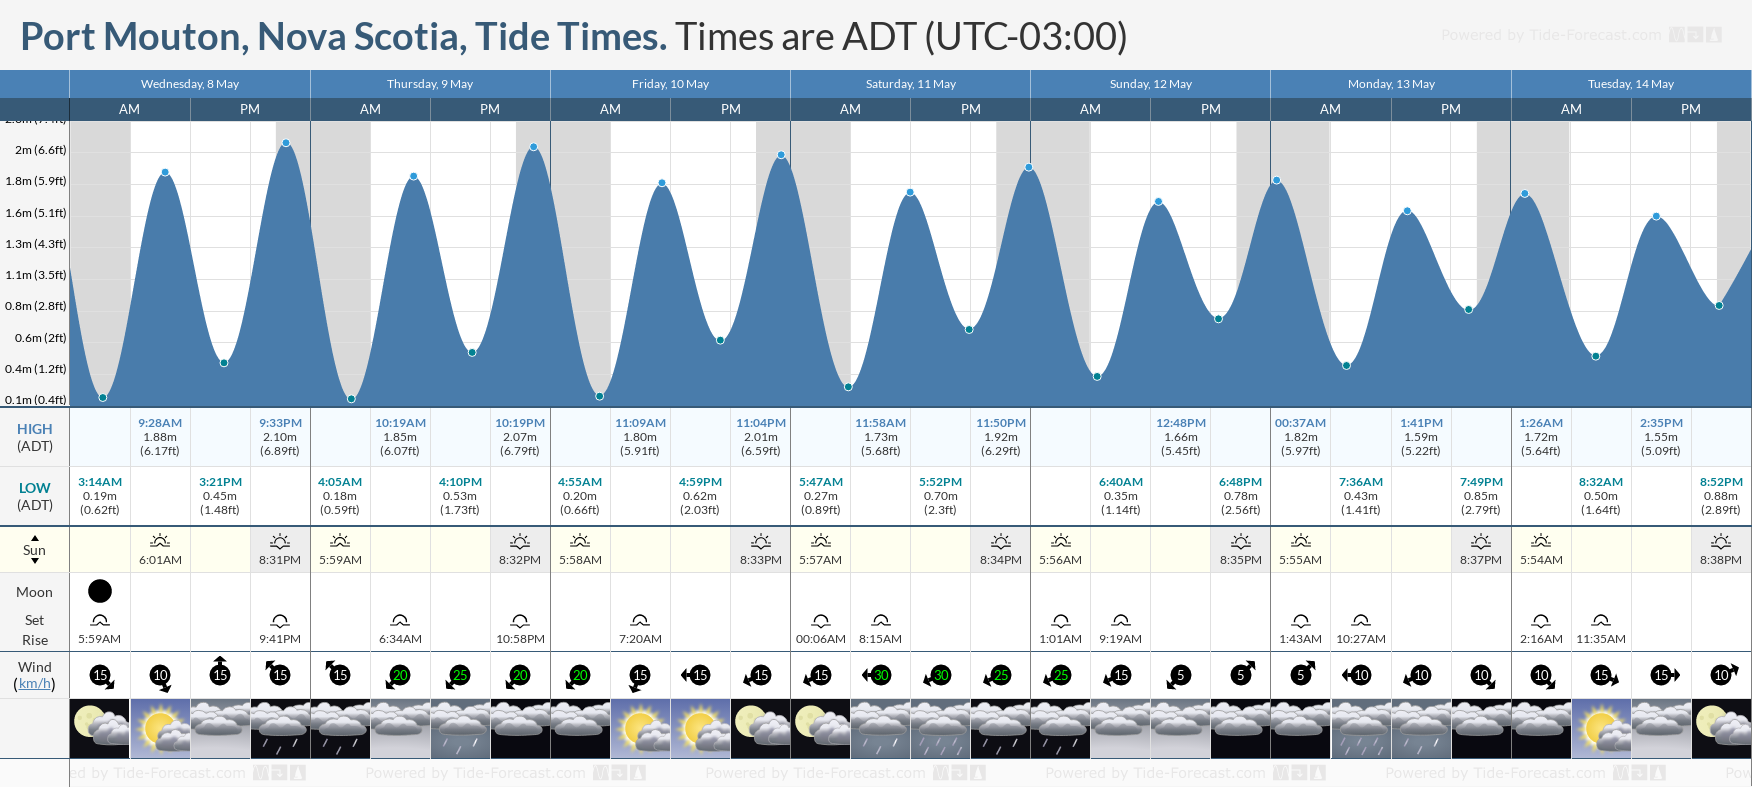 Port Mouton, Nova Scotia Tide Chart including high and low tide tide times for the next 7 days